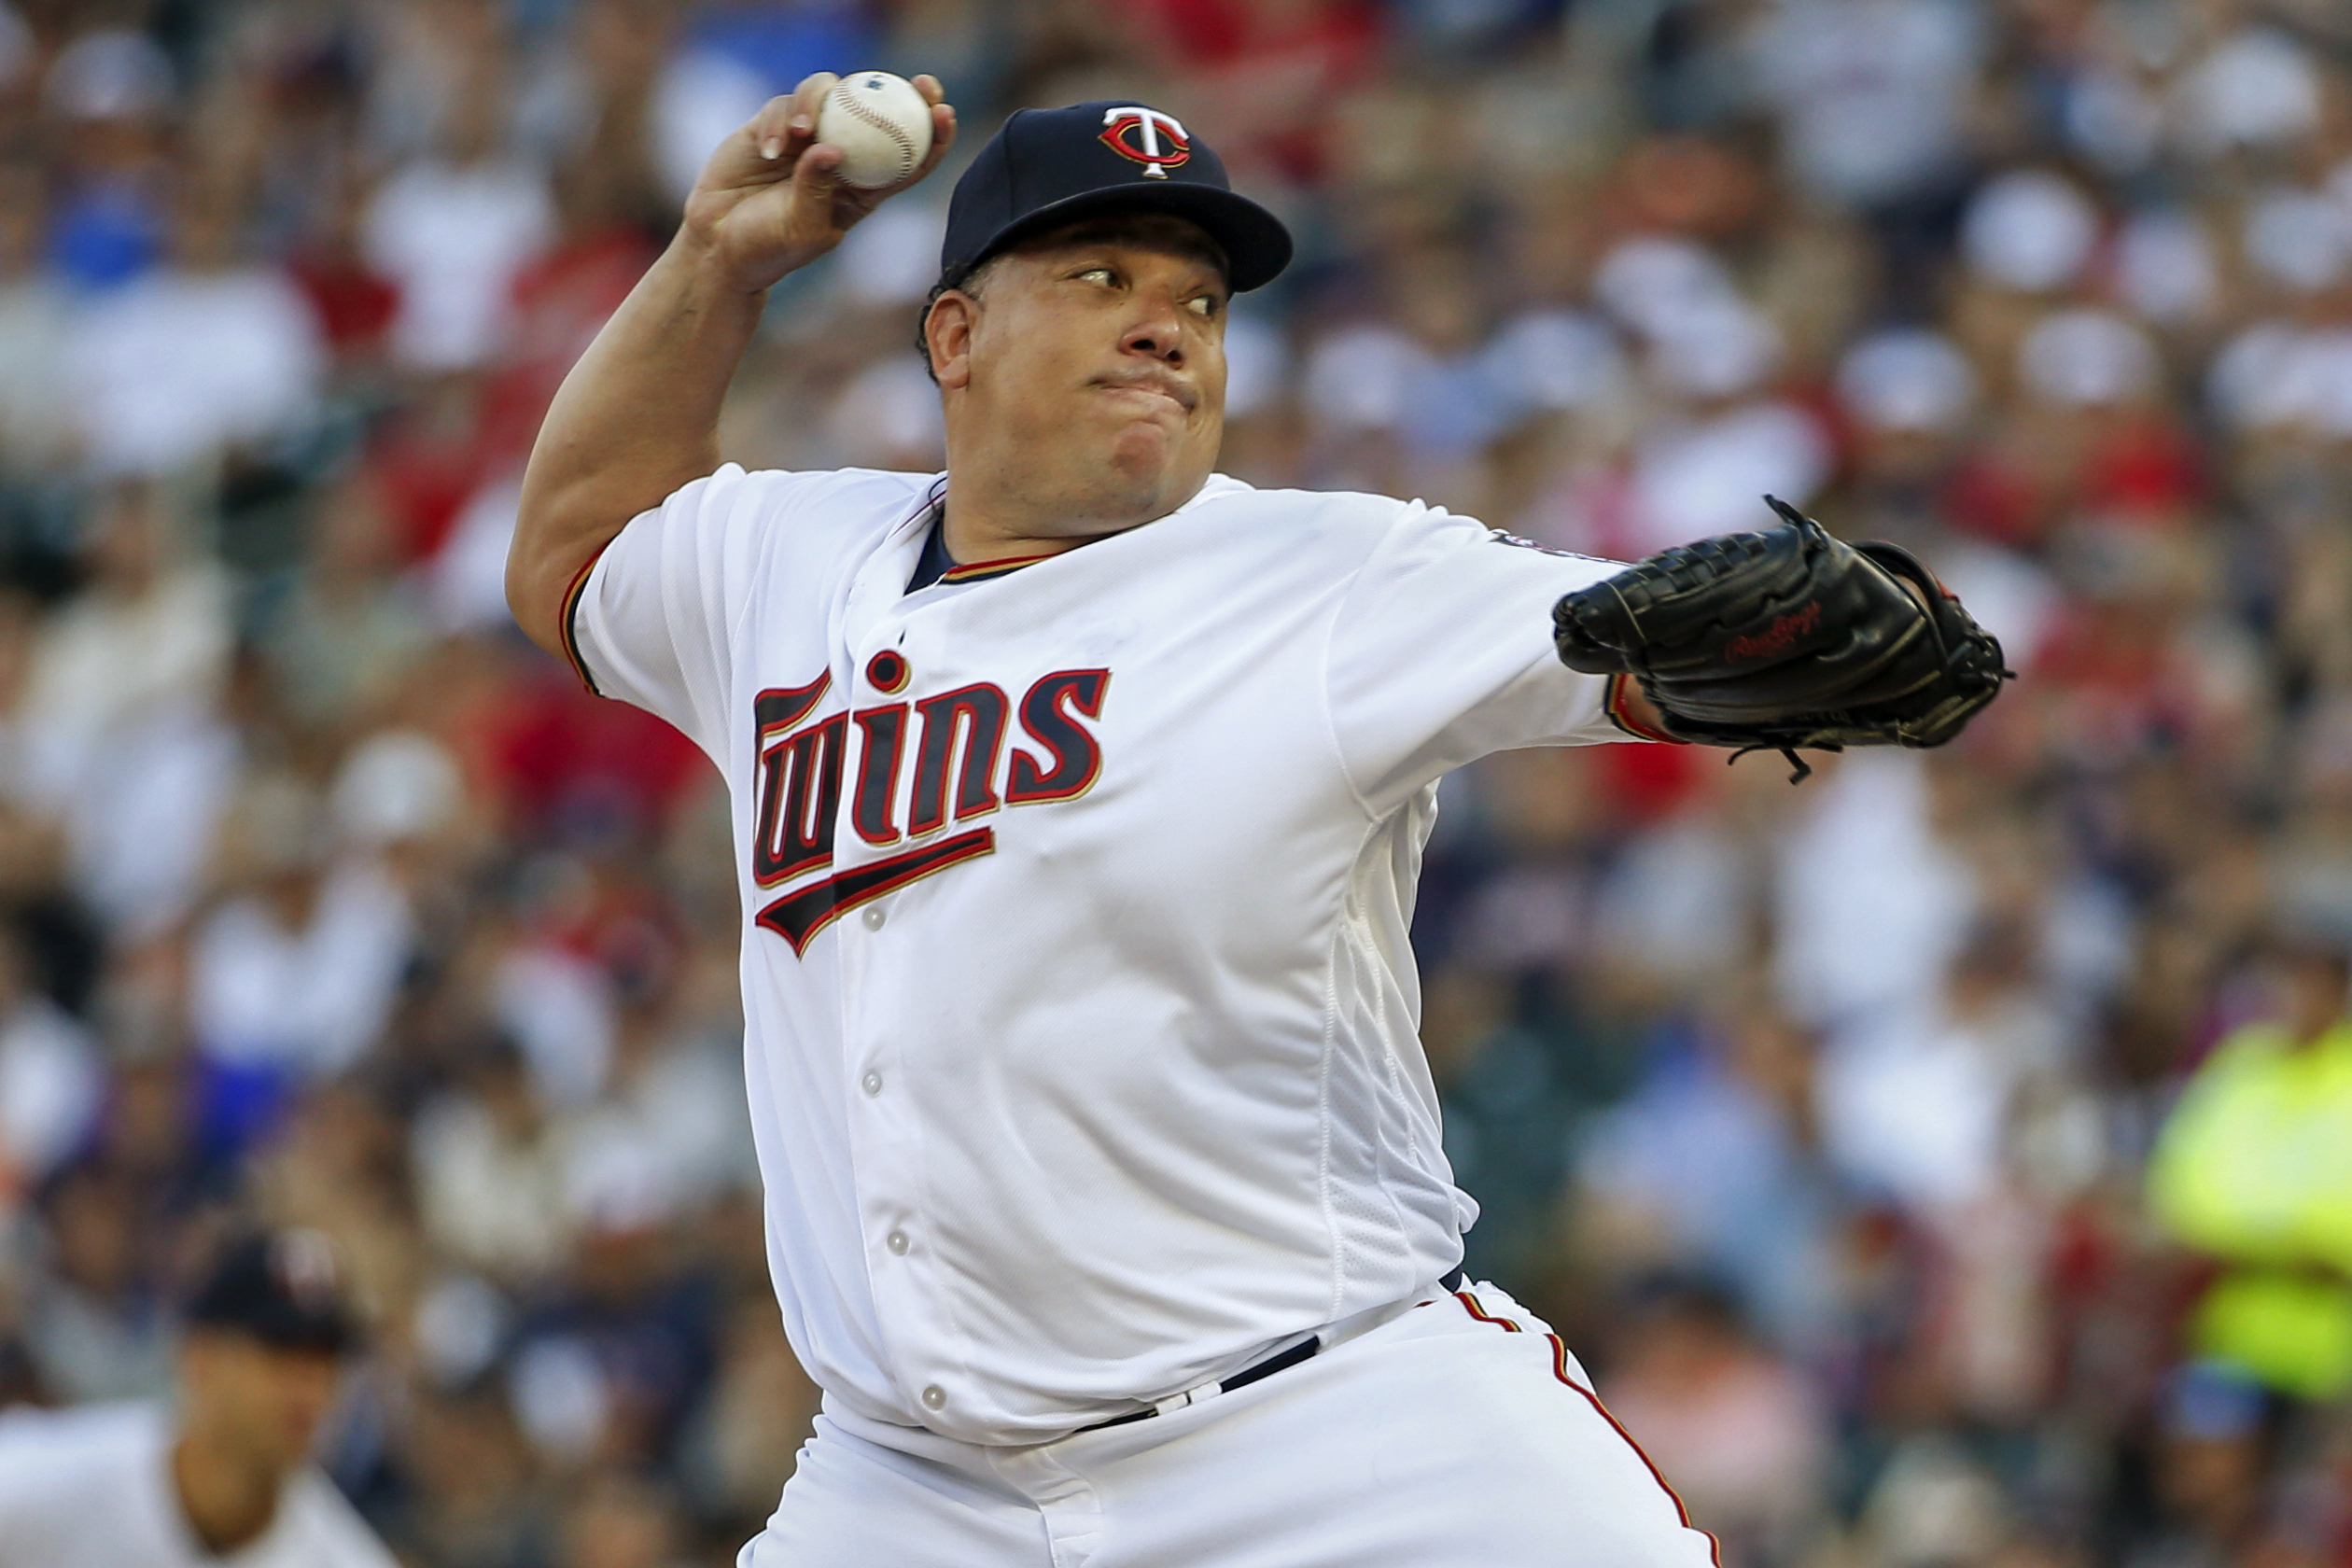 Former Brave Bartolo Colon becomes 18th pitcher to defeat all 30